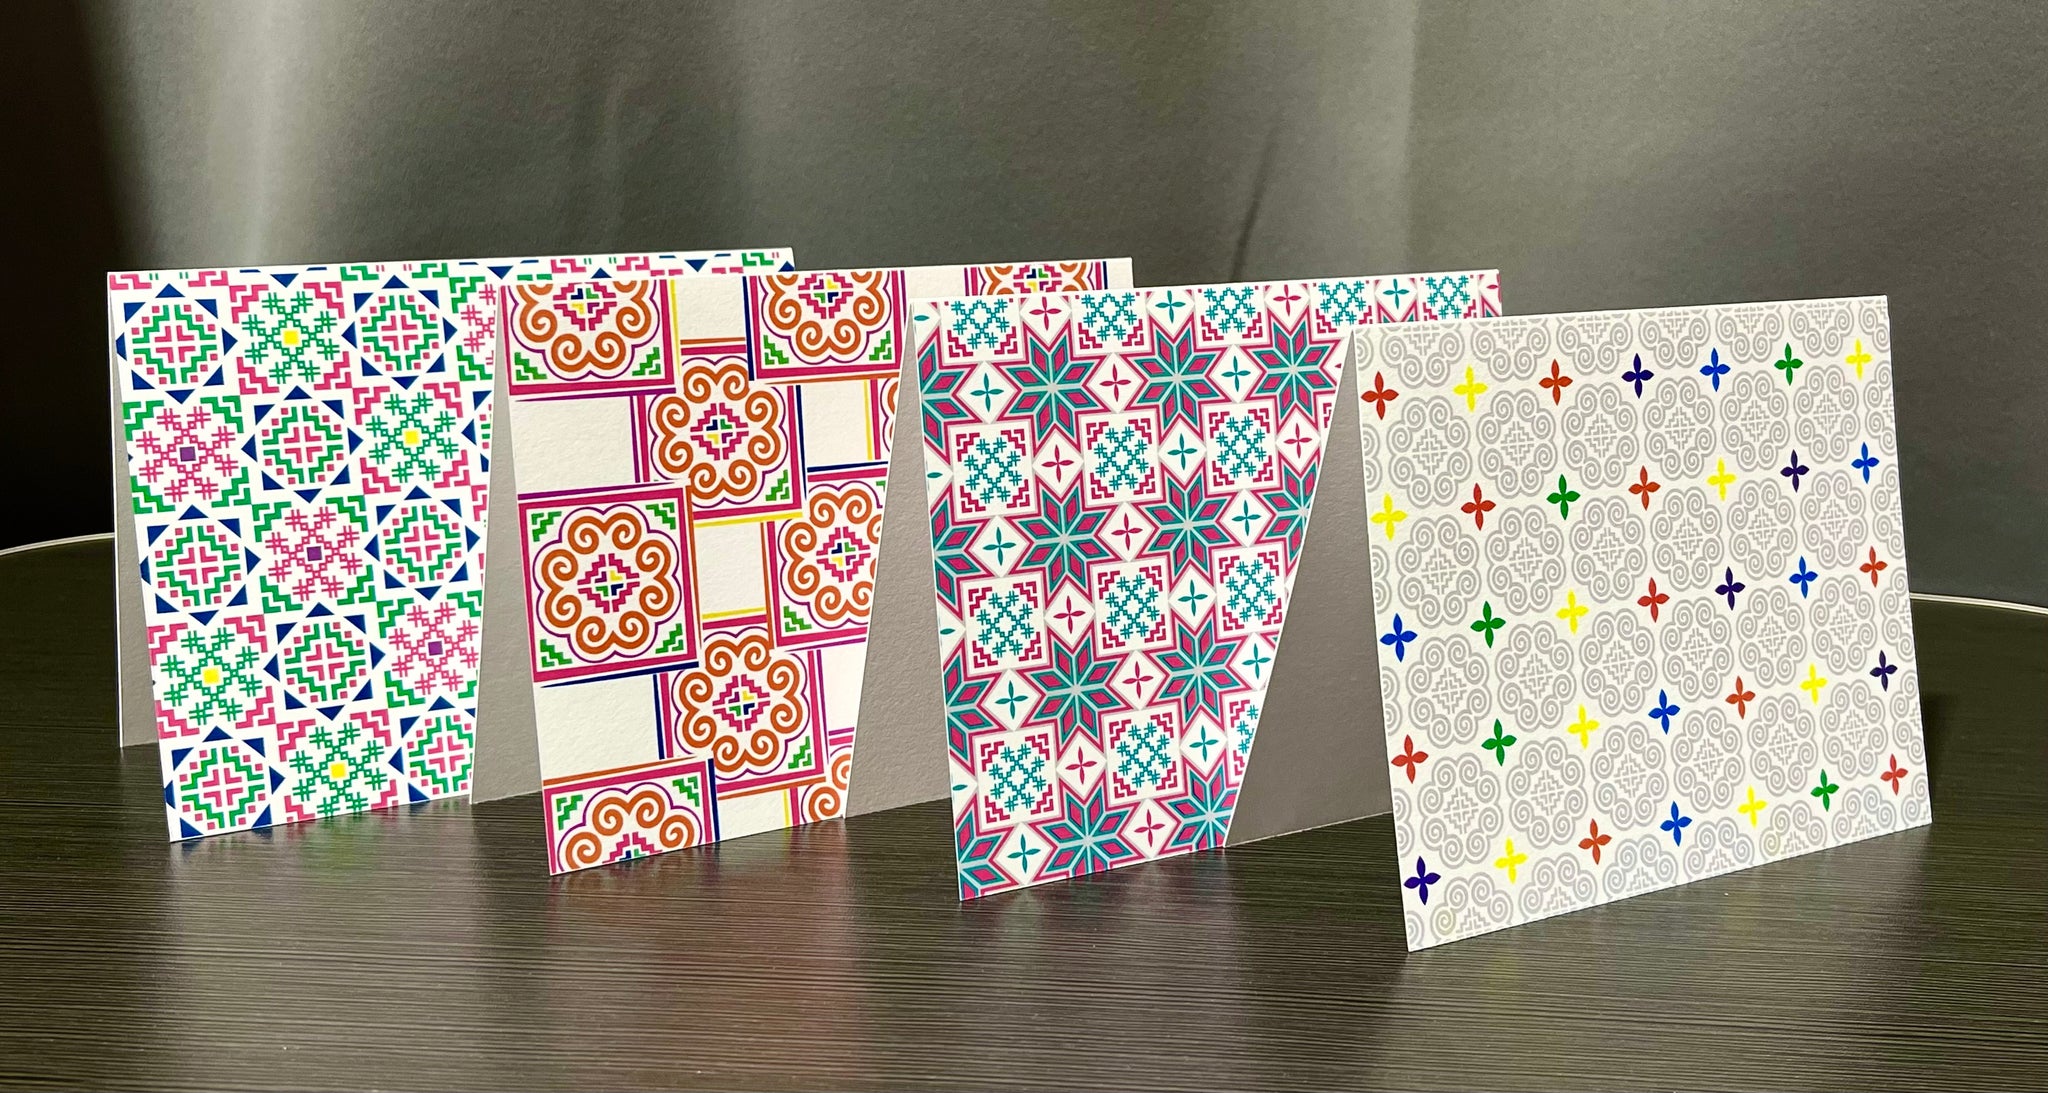 Hmong Inspired Blank Note Cards Set 2